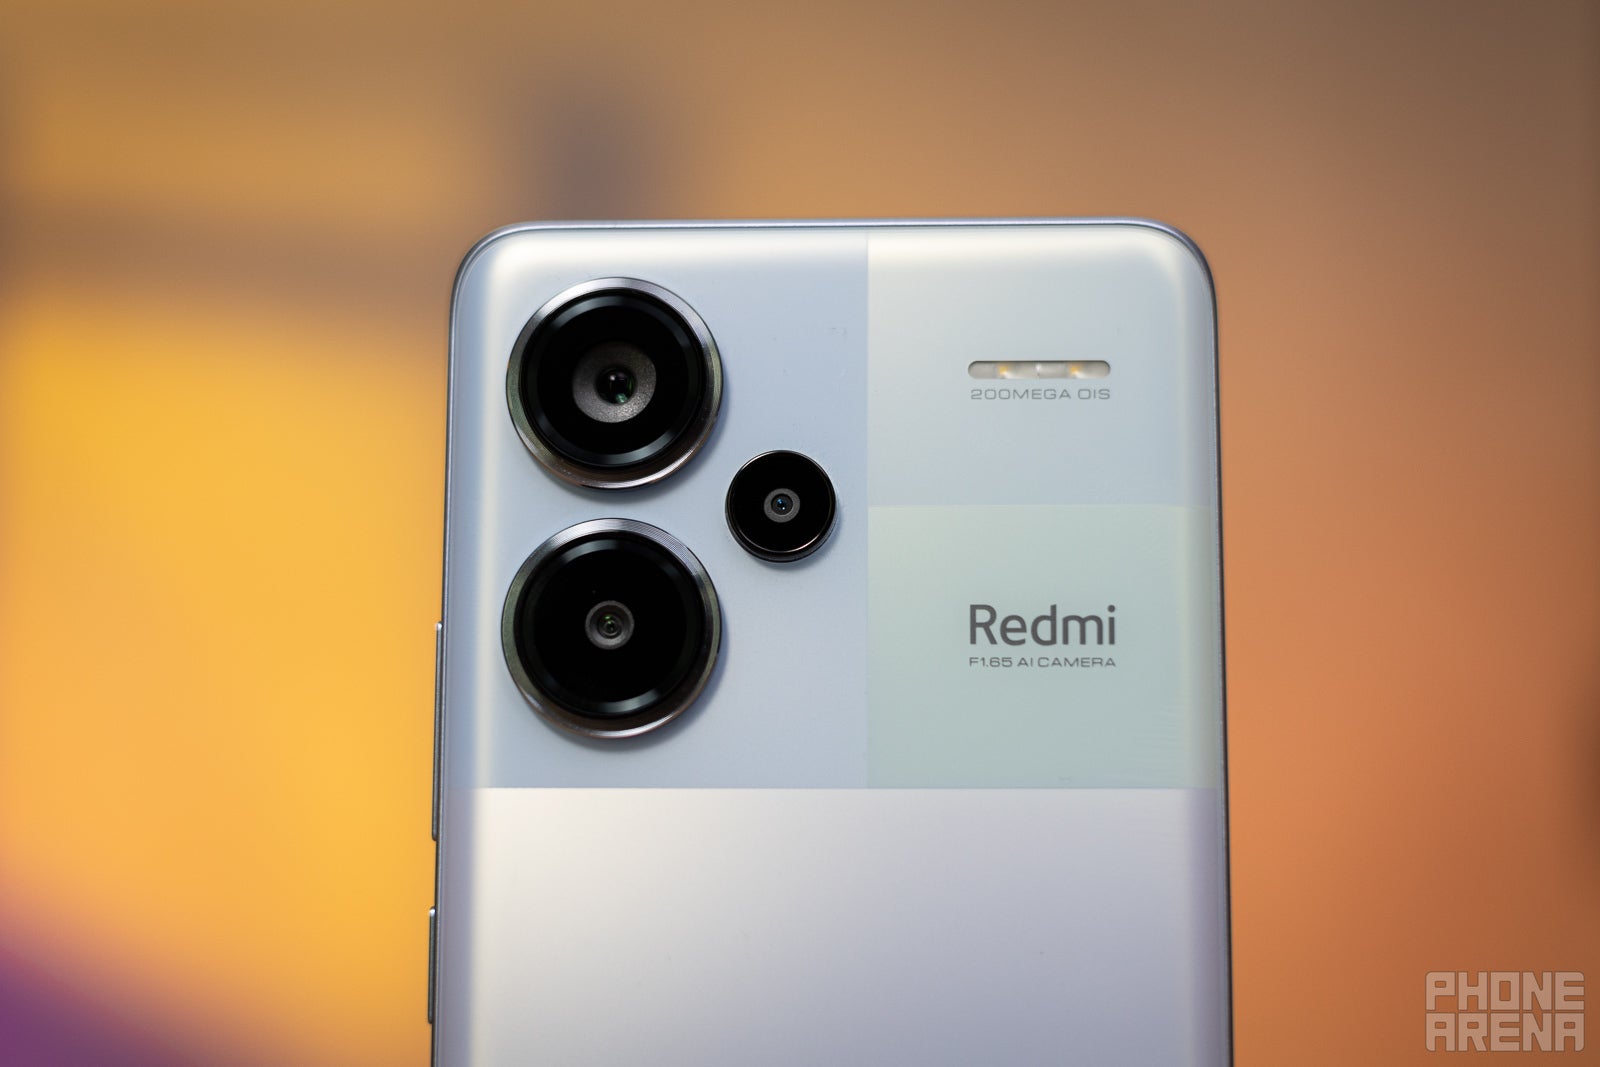 5 Major Reasons To Buy Redmi Note 13 Pro+ 5G - Mobile Clusters